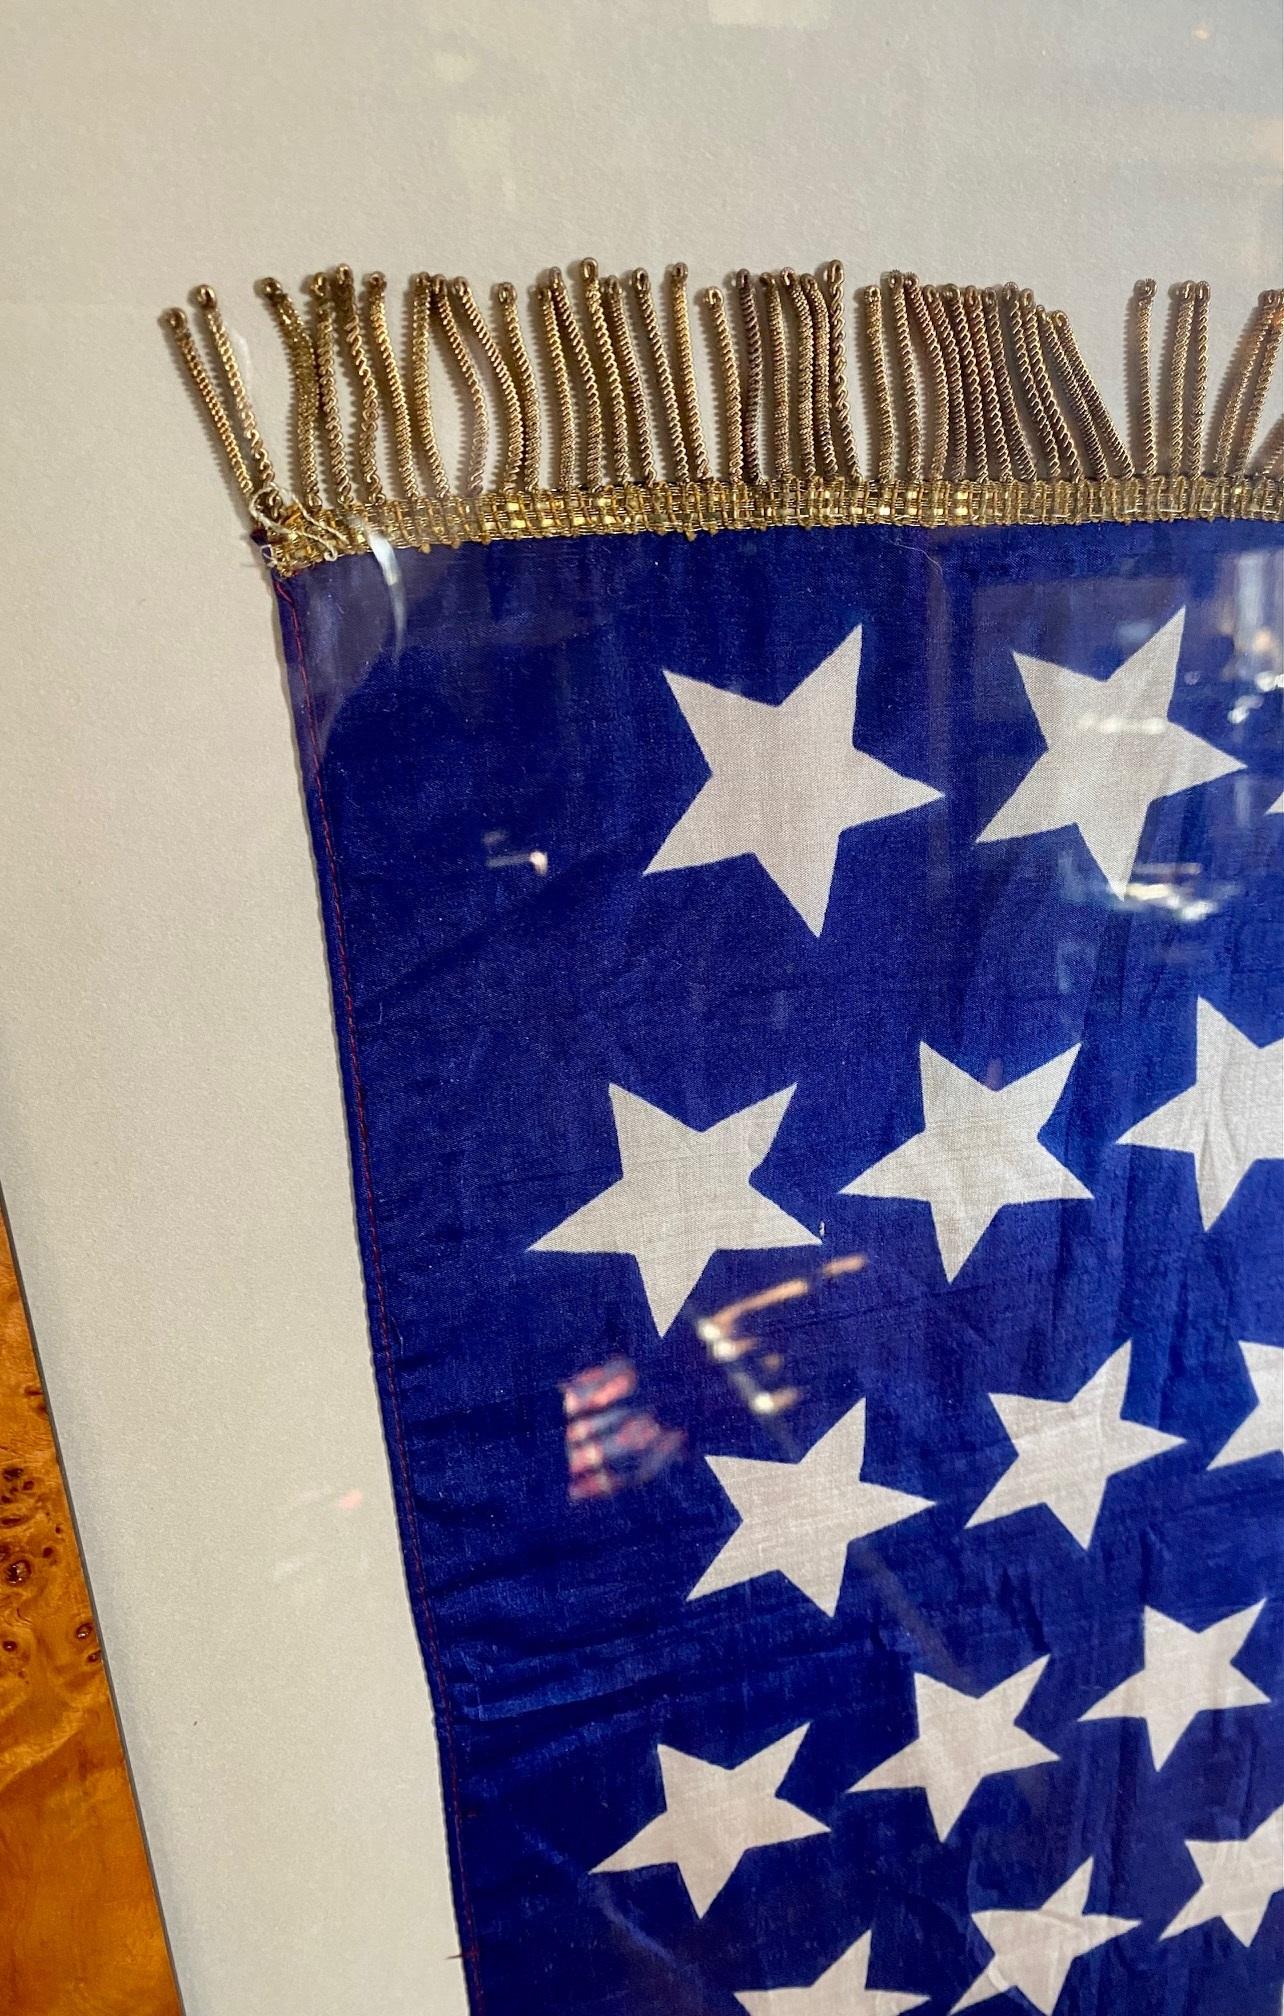 Antique American 45 Star Flag with Gilt Metallic Fringe, circa 1896, a large flag with 45 stars set in a 